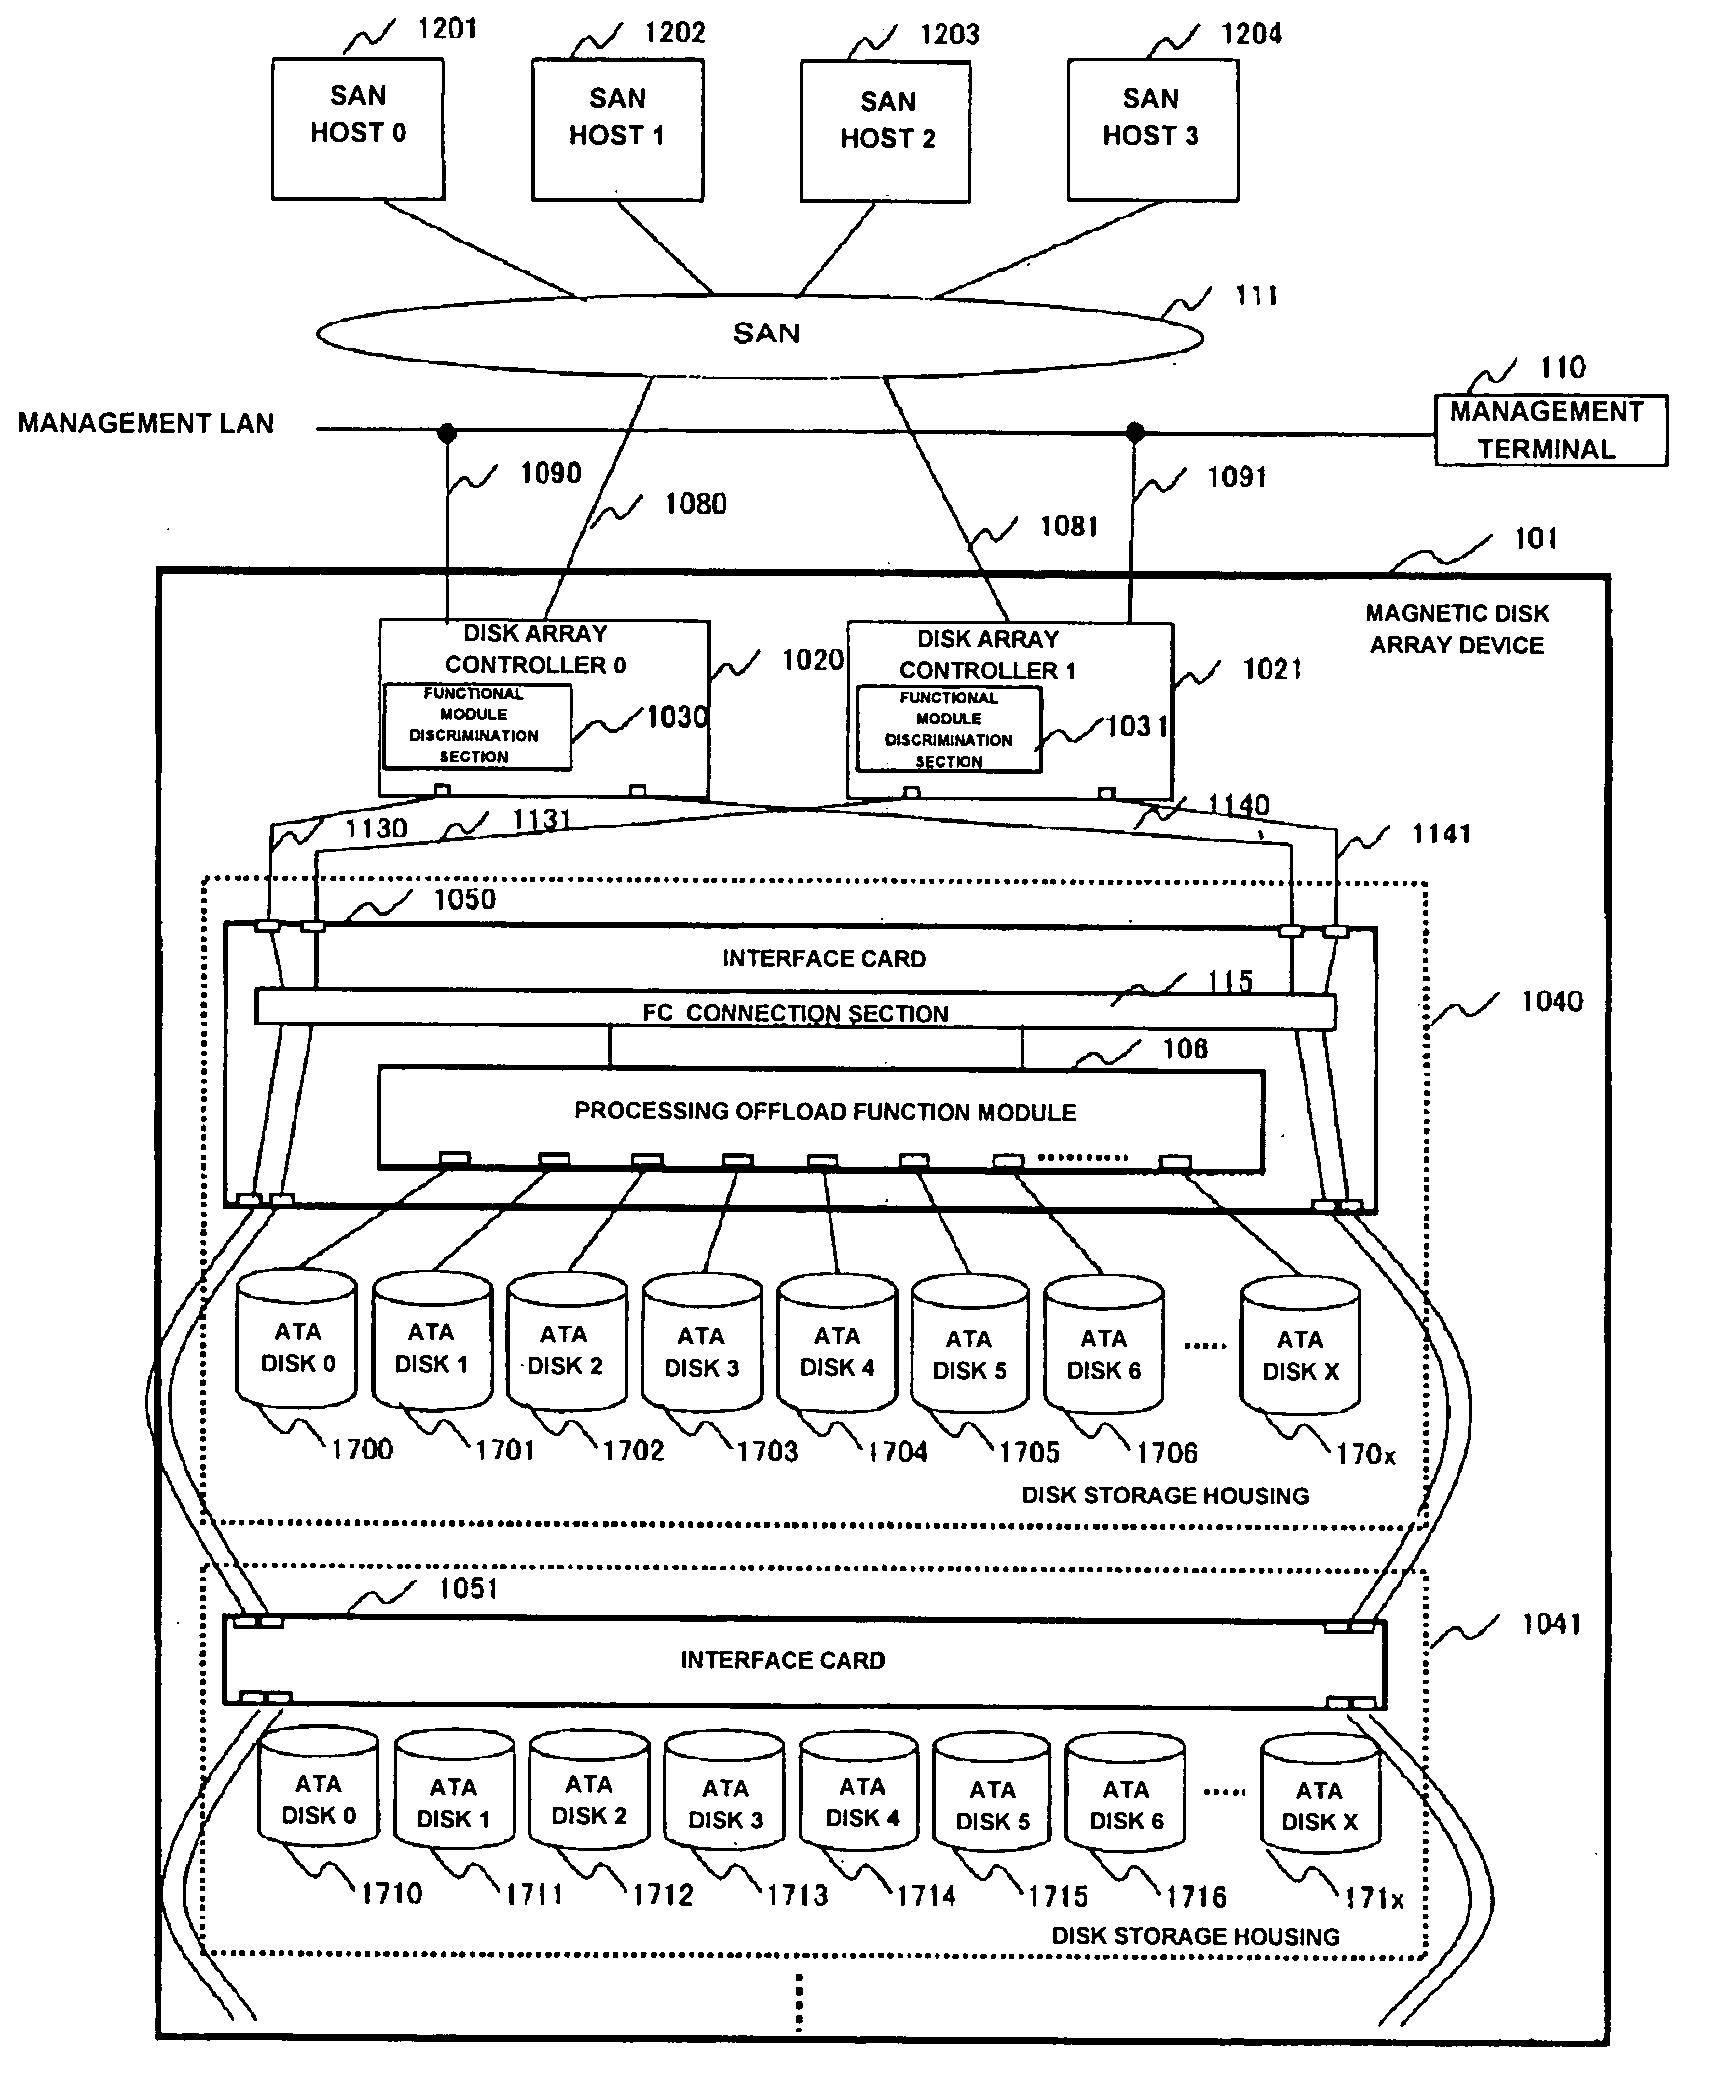 Magnetic disk array device with processing offload function module